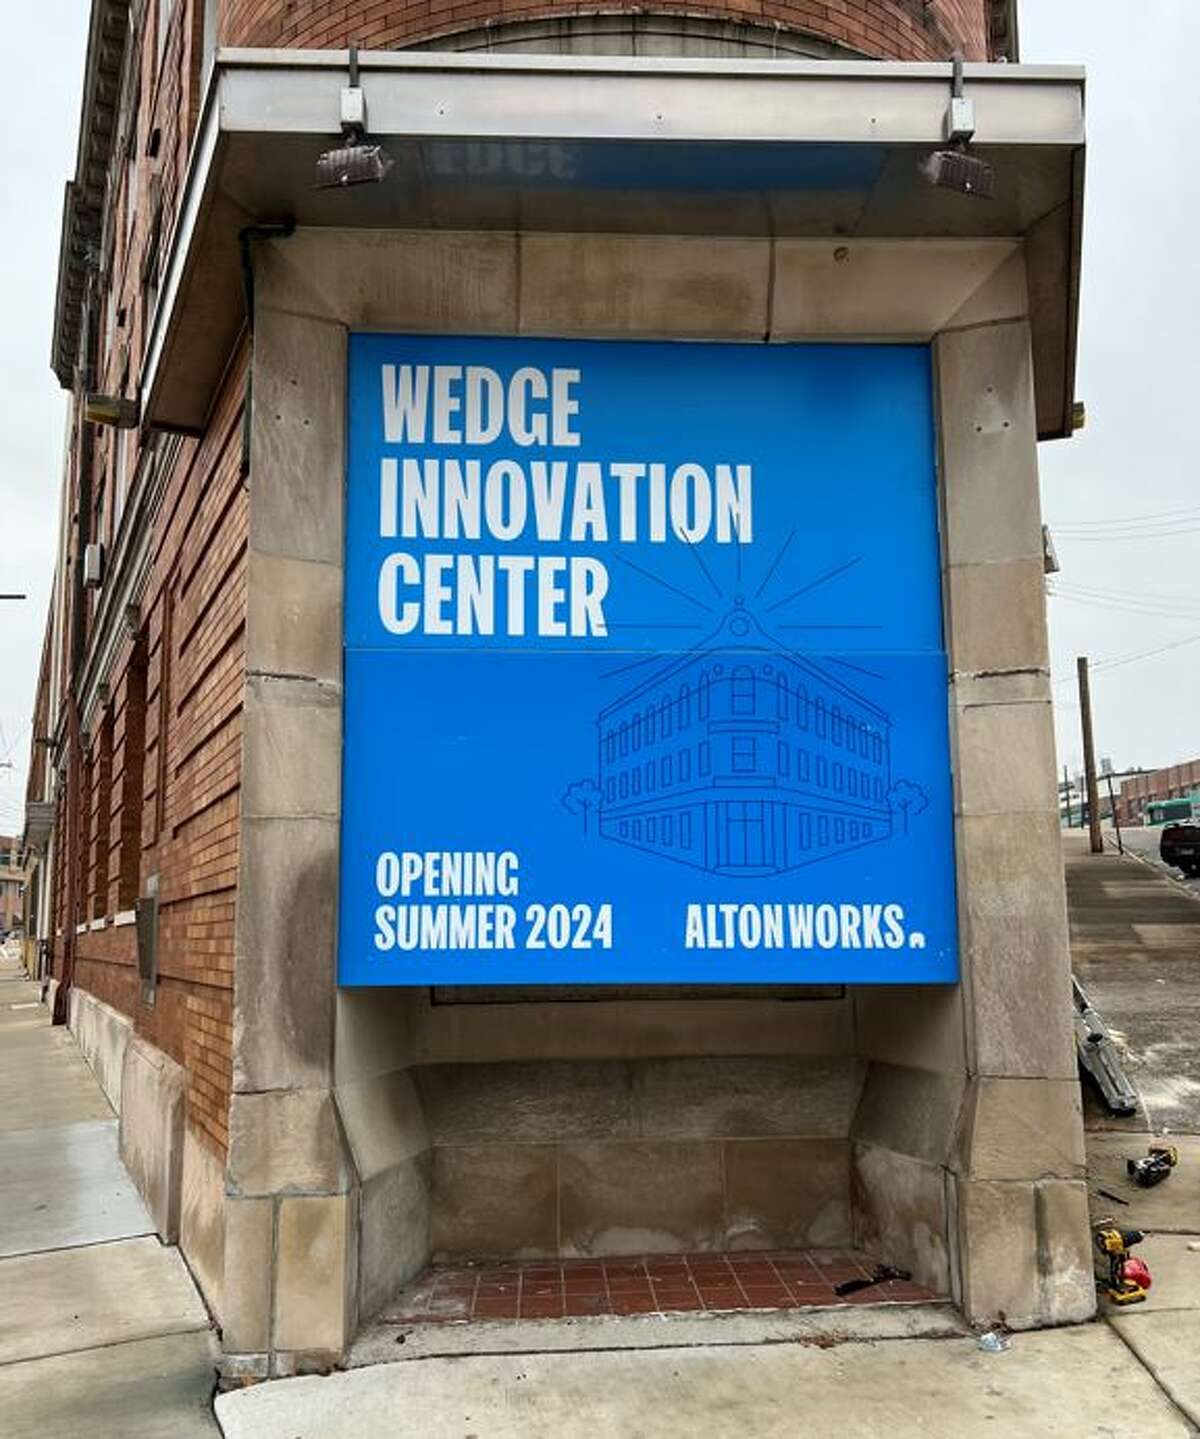 Construction is scheduled to start Monday on the Wedge Innovation Center on East Broadway, according to AltonWorks.